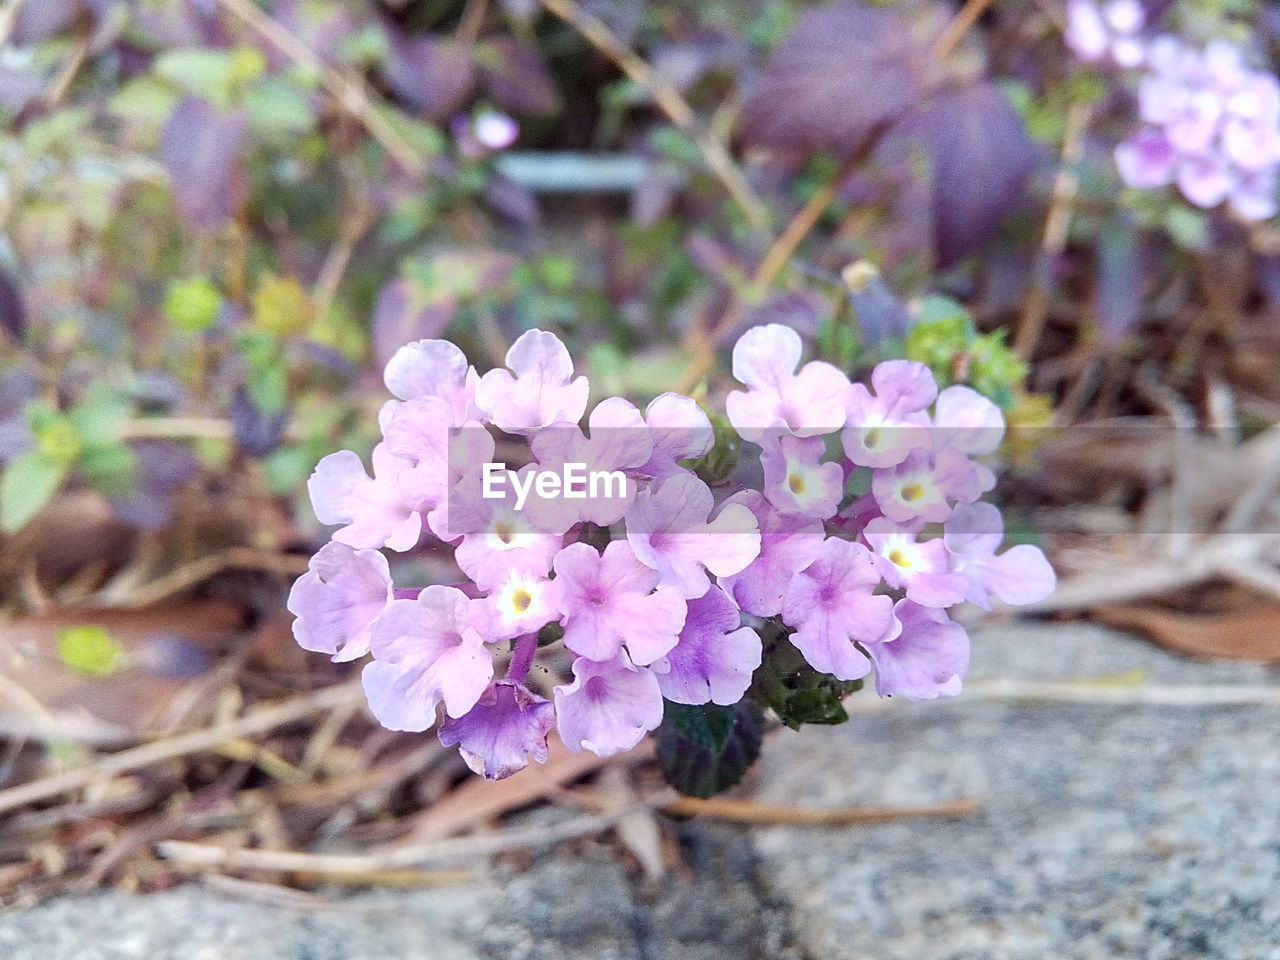 CLOSE-UP OF FRESH PURPLE FLOWERS BLOOMING OUTDOORS